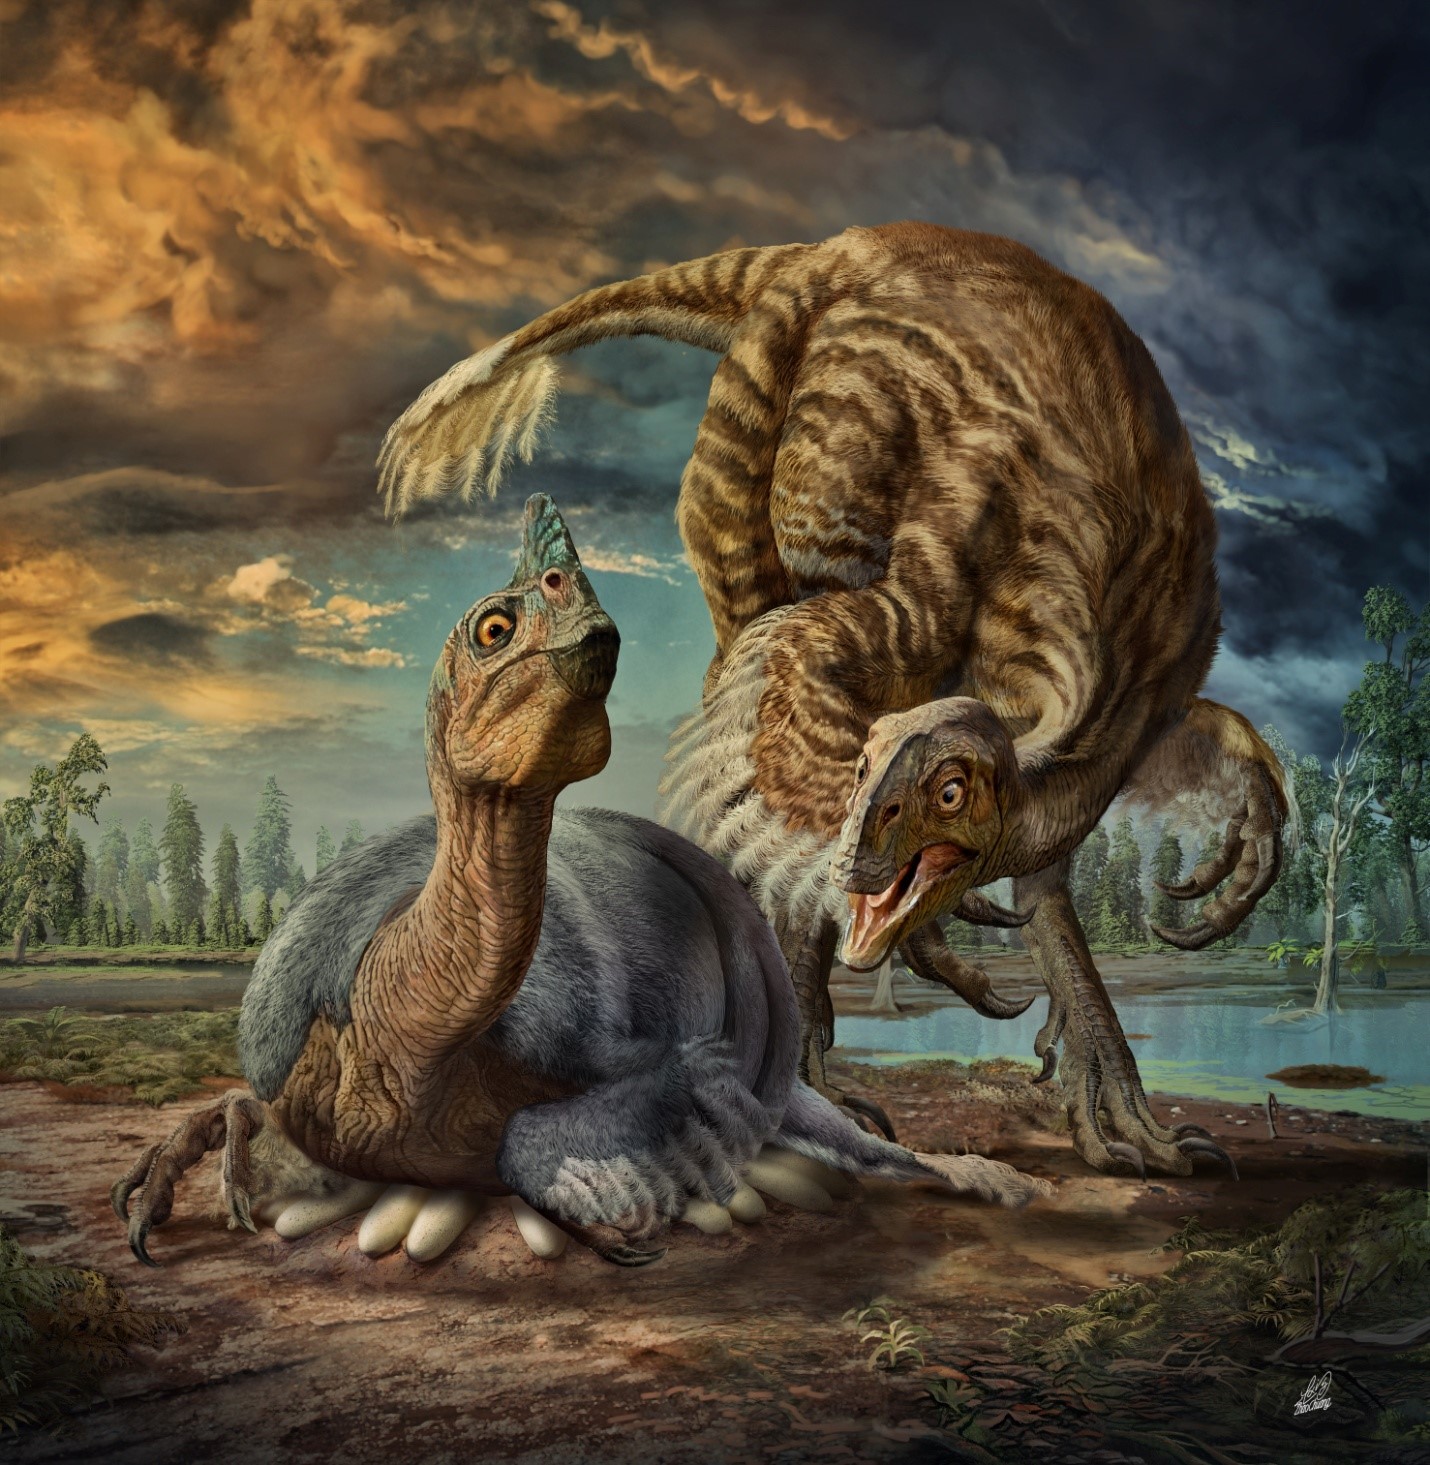 This giant feathered dinosaur had nests the size of monster truck tires